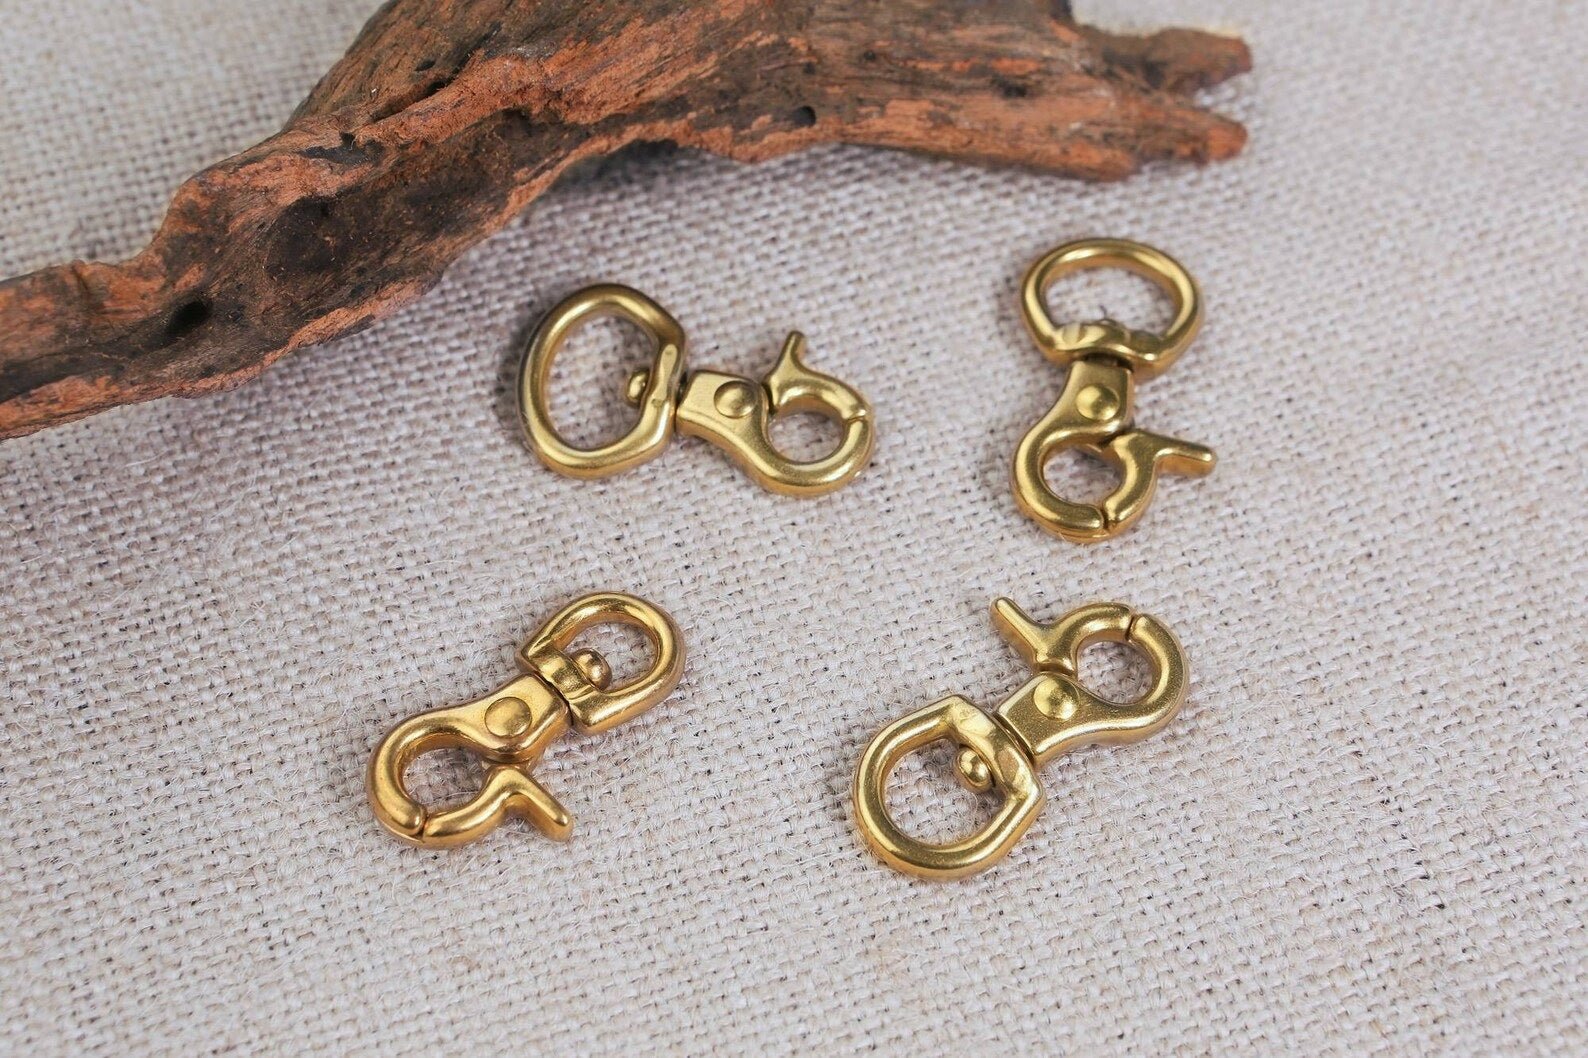 10-50 pieces 3 size 12mm 15mm 20mm satin gold trigger snap hook Hardware  Accessories metal